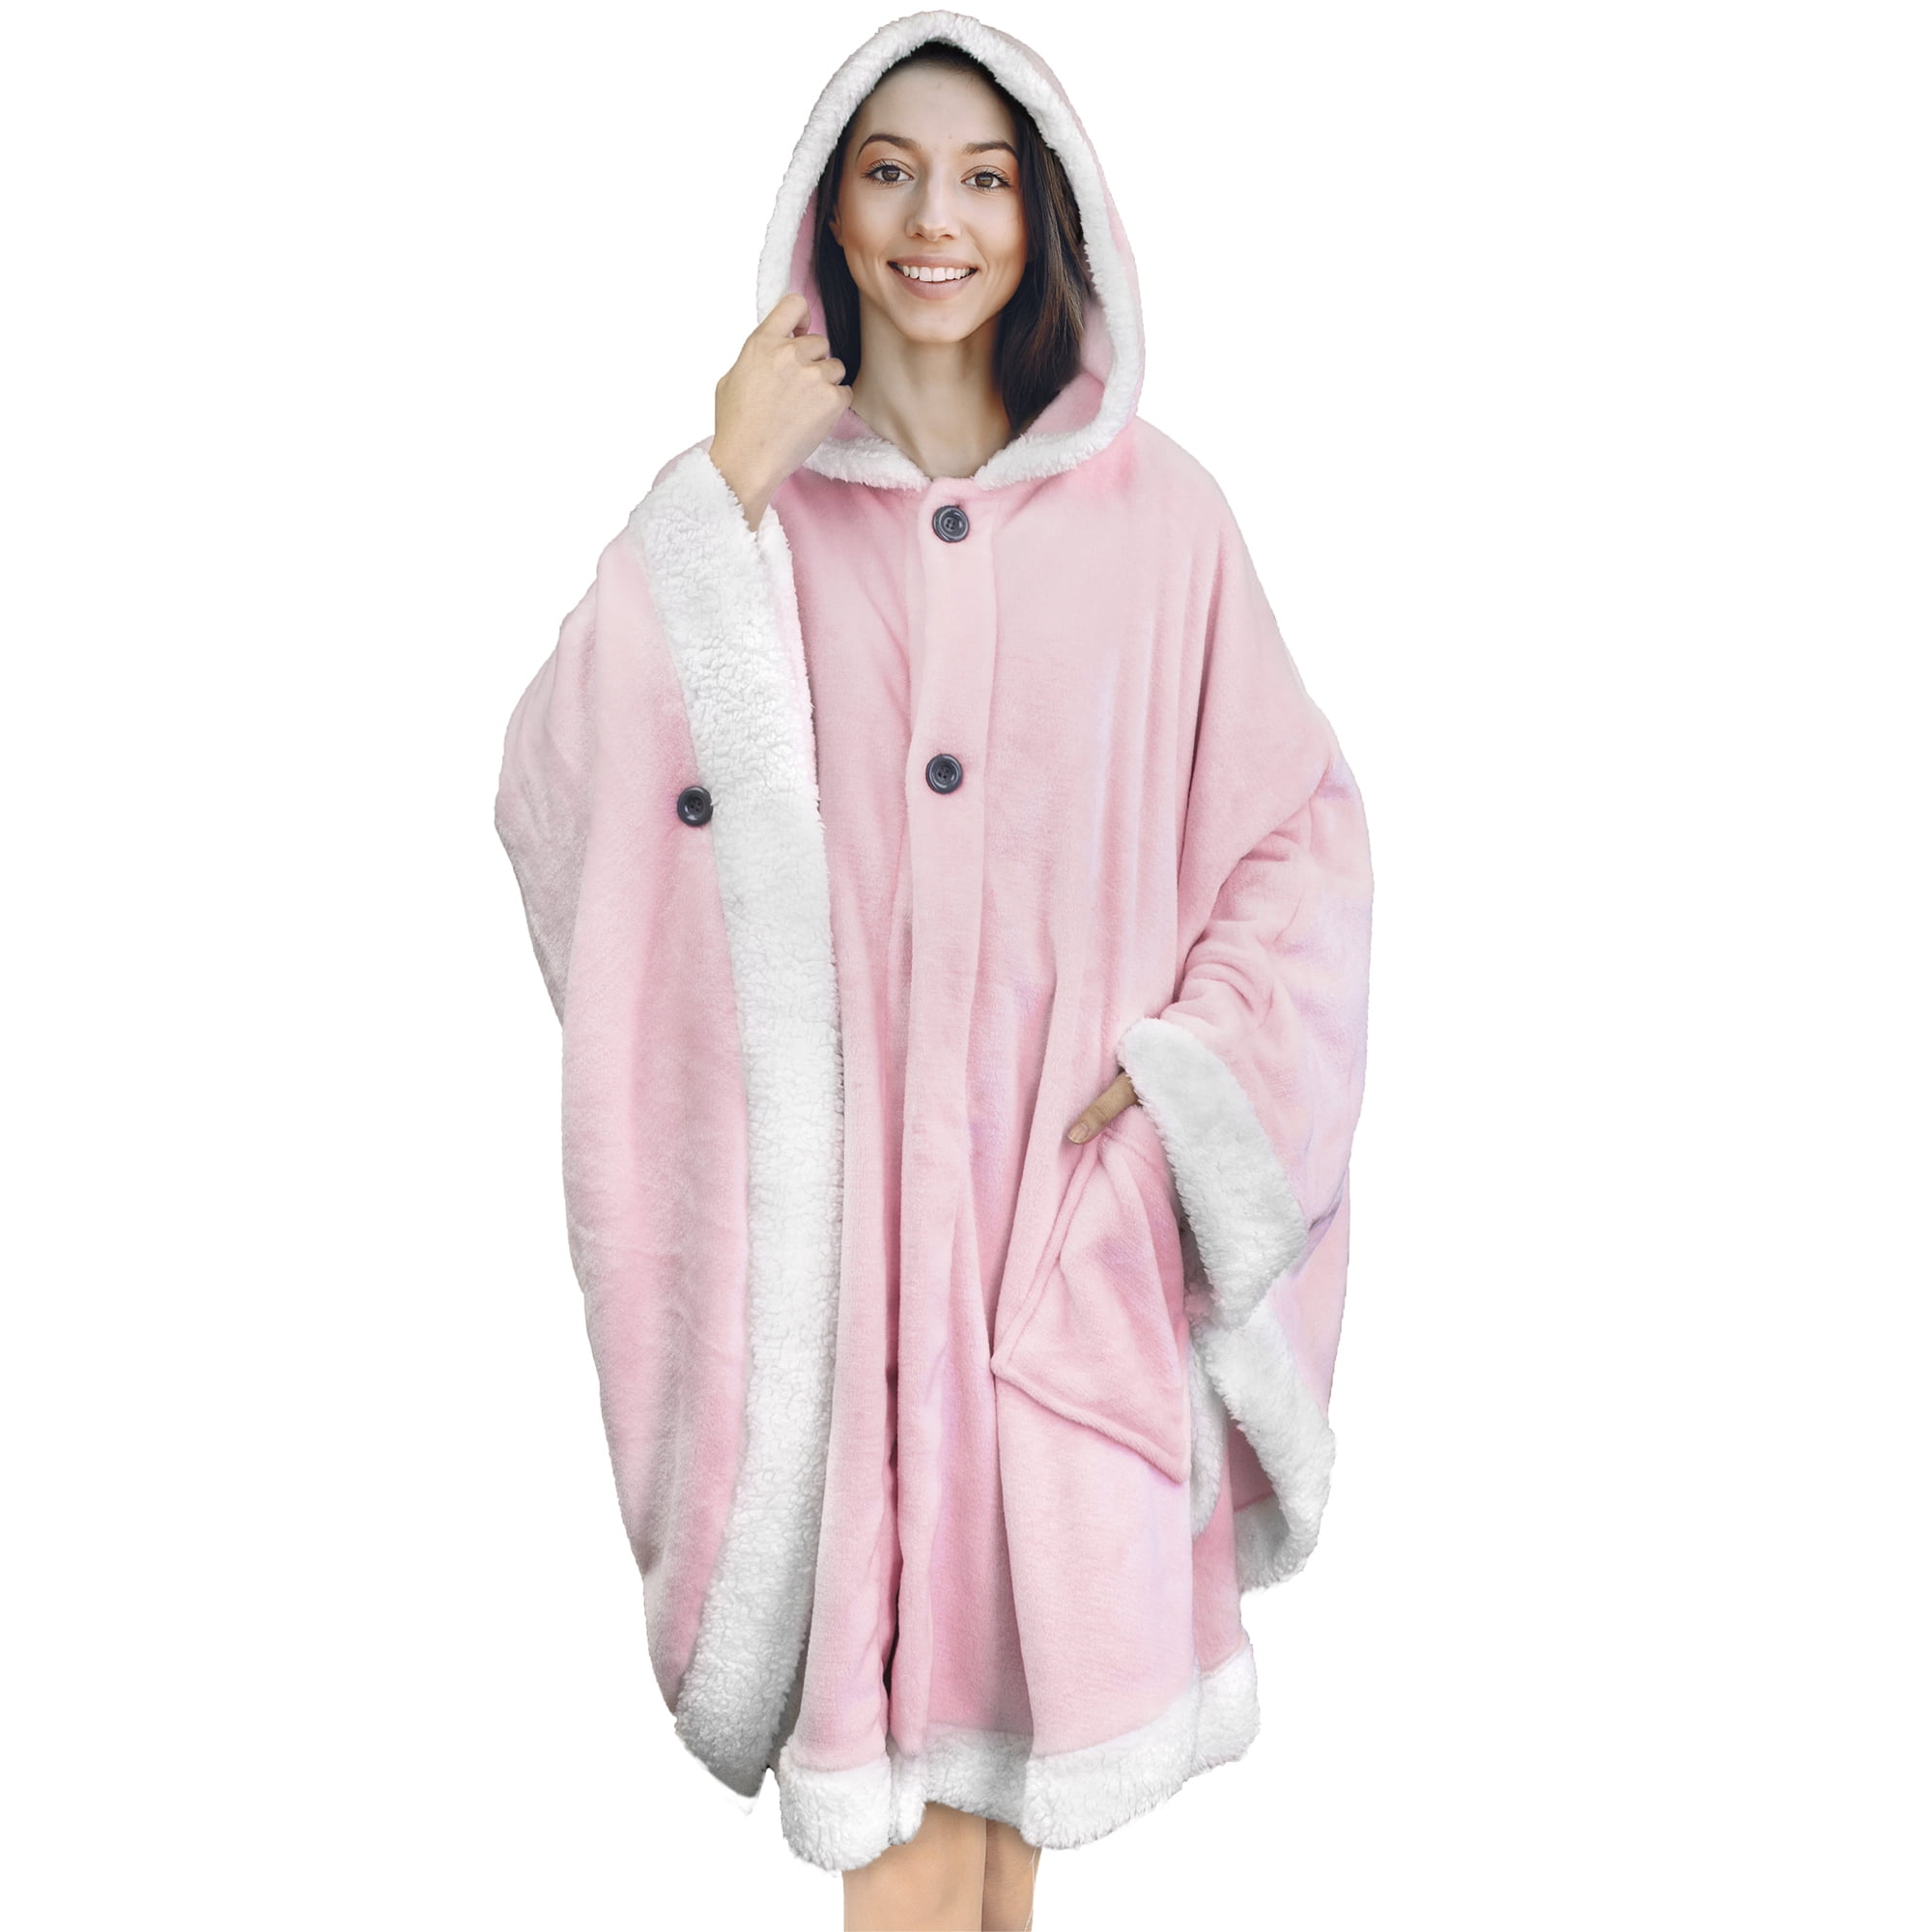 PAVILIA Angel Wrap Hooded Blanket | Poncho Blanket Wrap with Soft ...